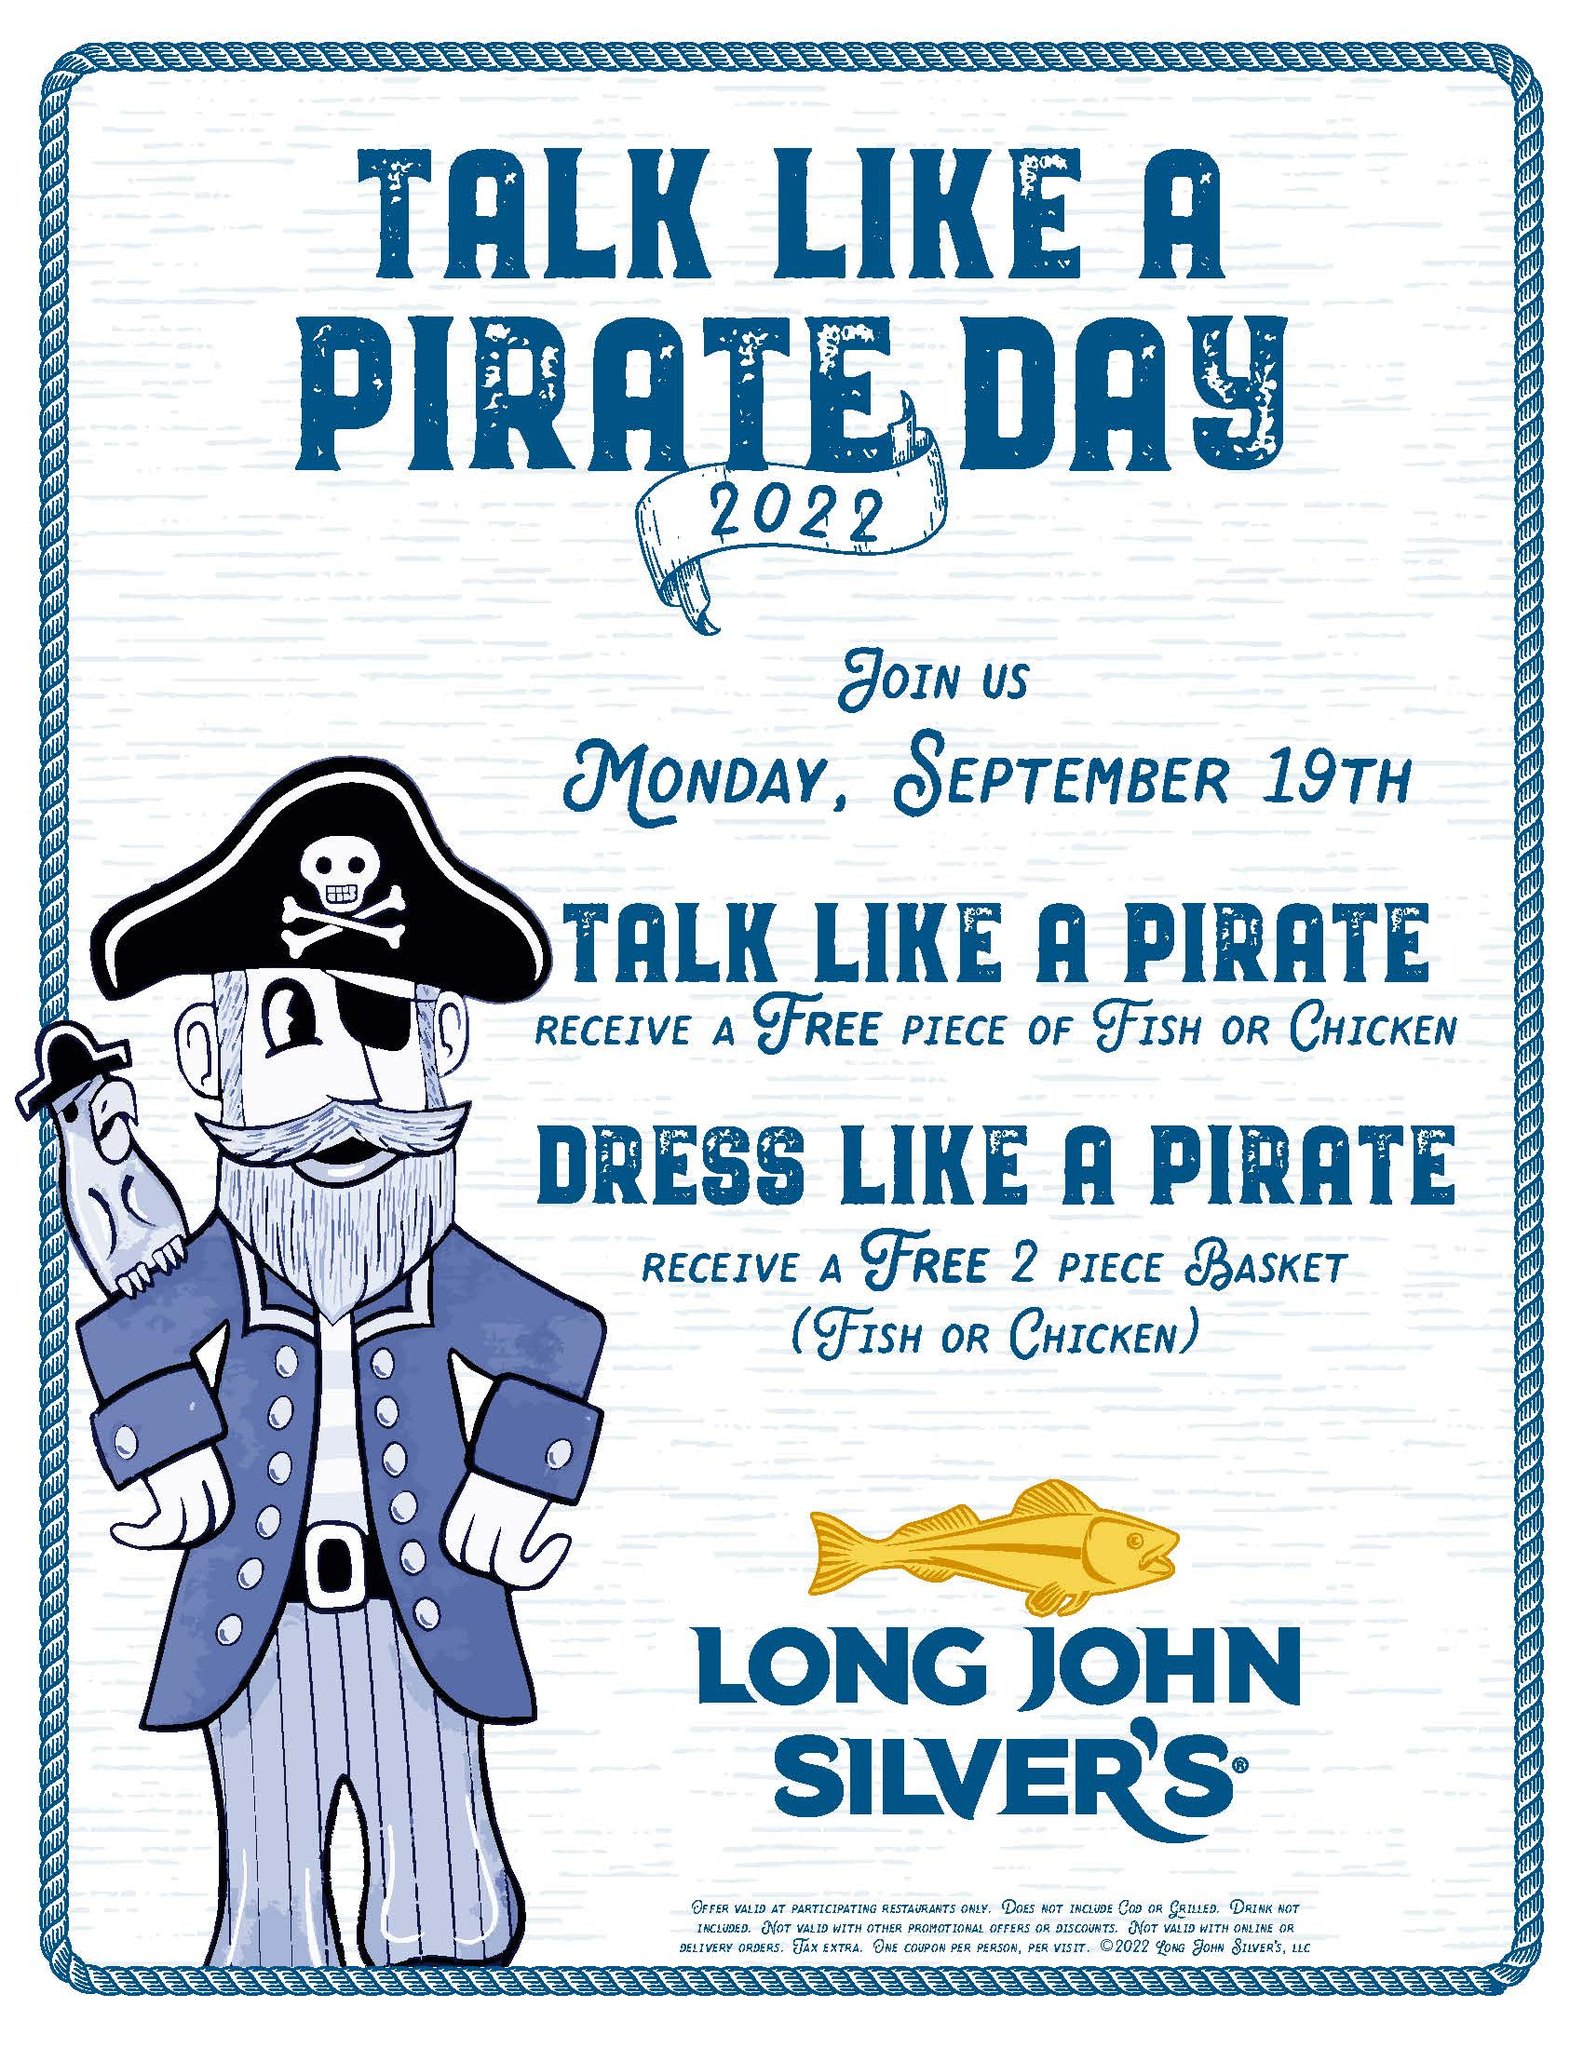 Long John Silver's (September 19th): Dress Like A Pirate, Get 2-Piece Fish / Chicken Basket for Free; Talk Like A Pirate, Get Free Piece of Fish / Chicken for Free